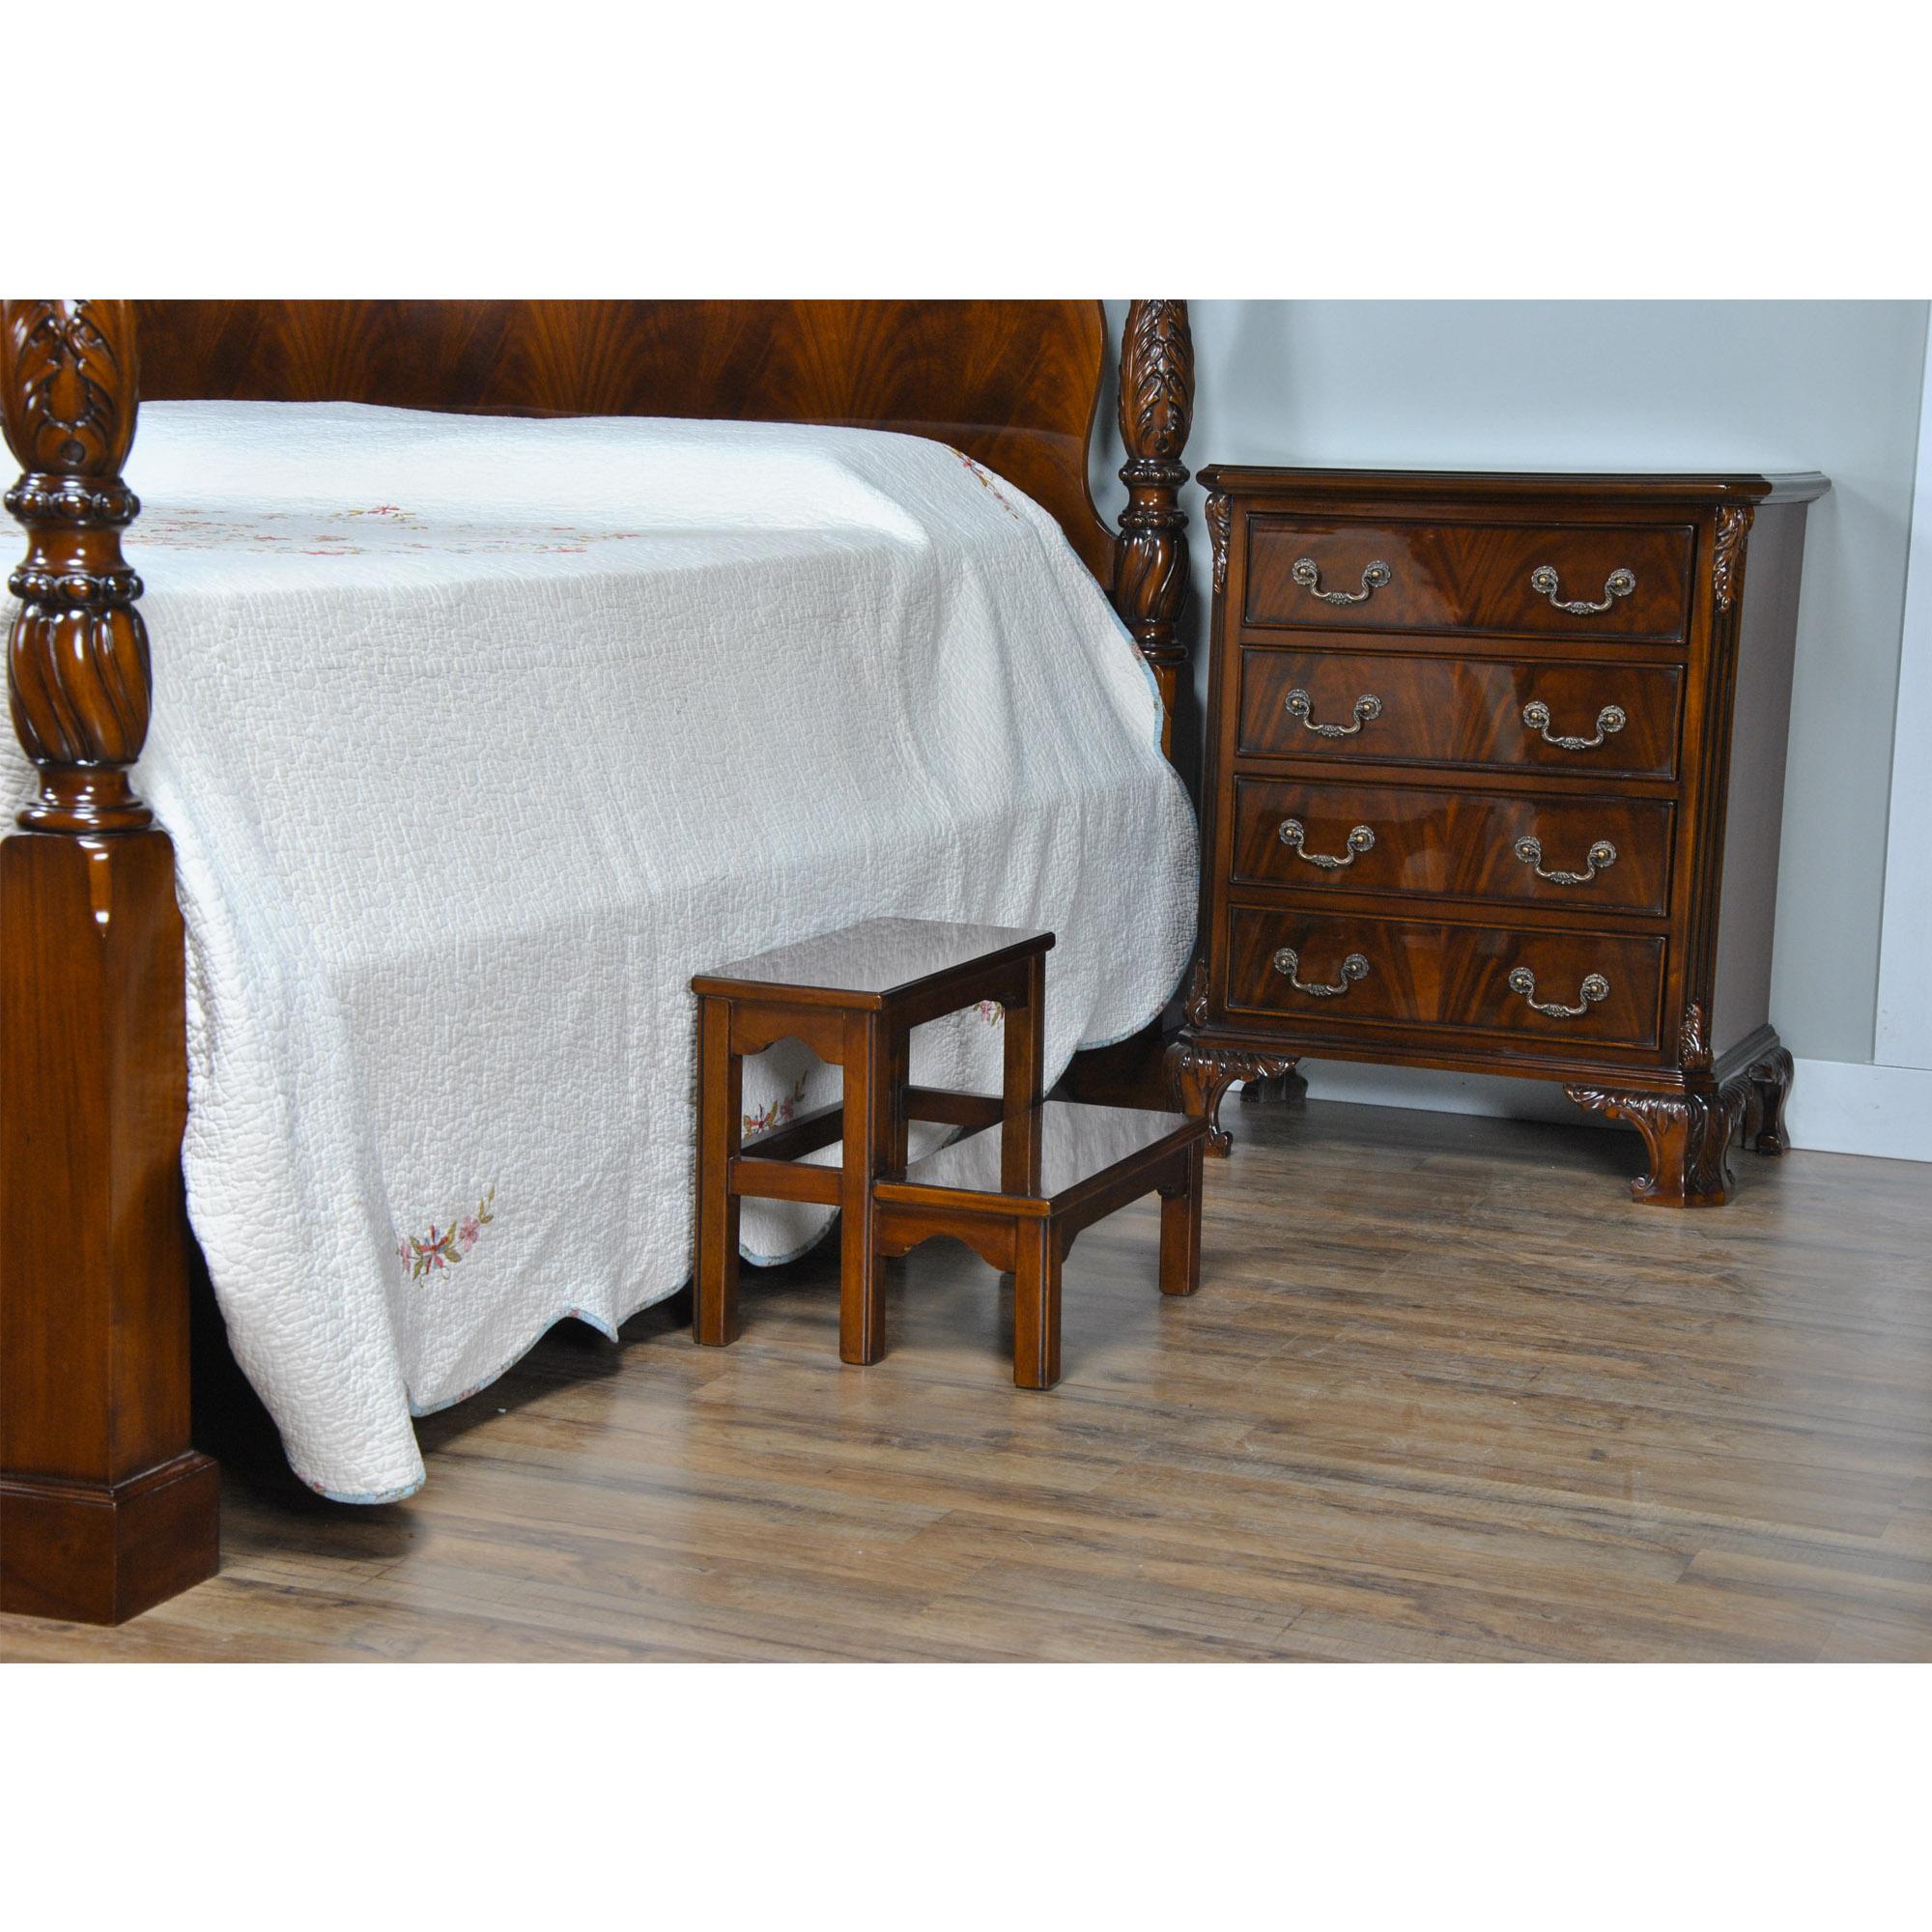 Contemporary Mahogany Bed Step For Sale